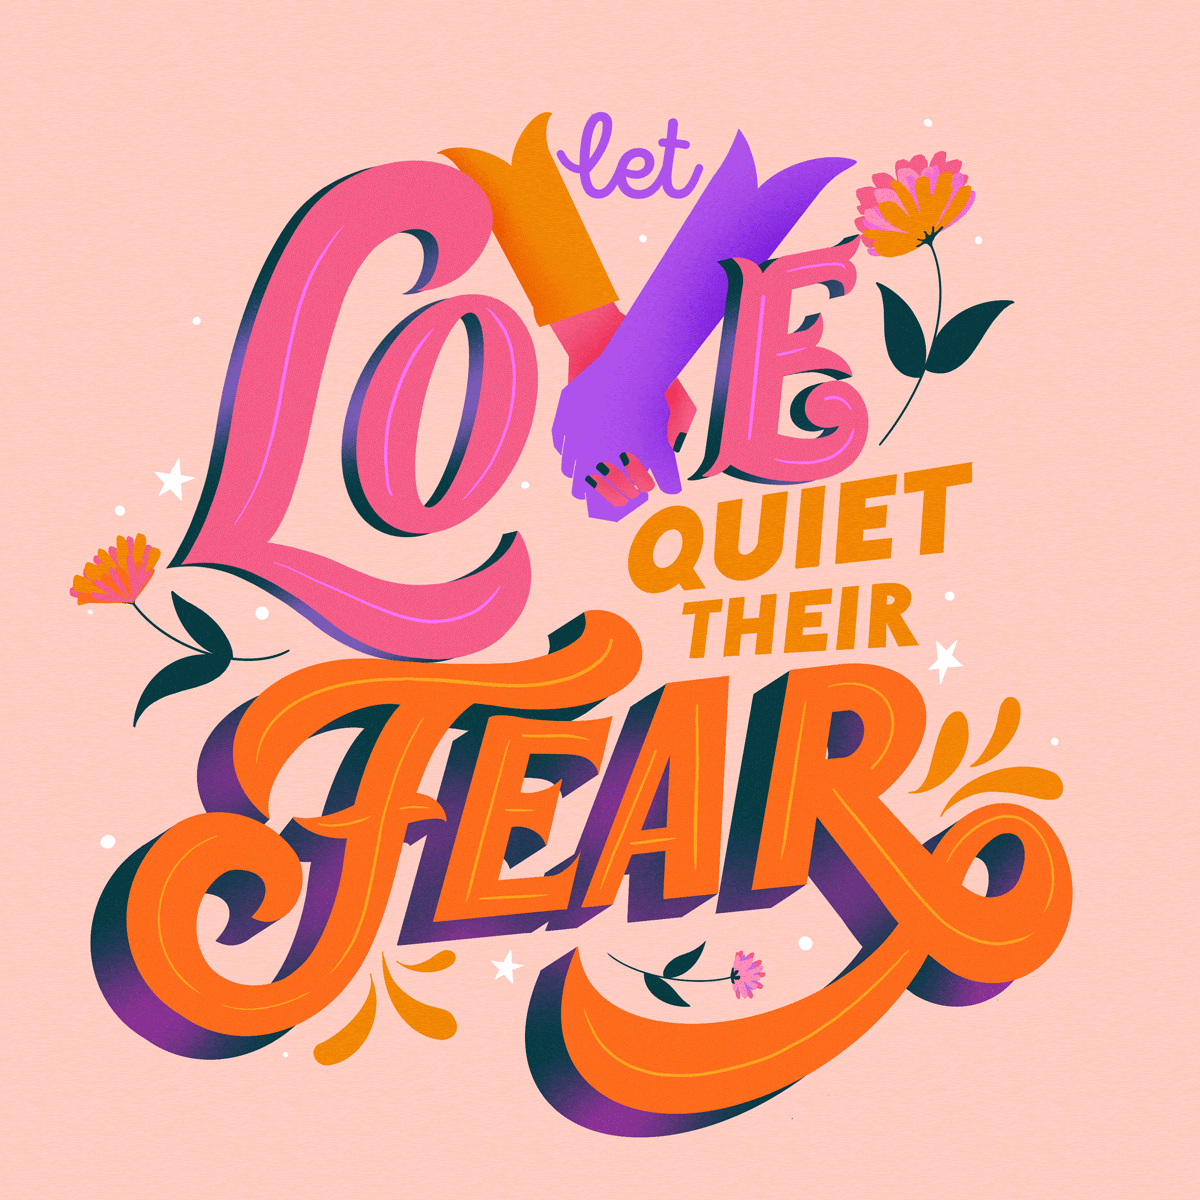 Image of the phrase "let love quiet their fear"